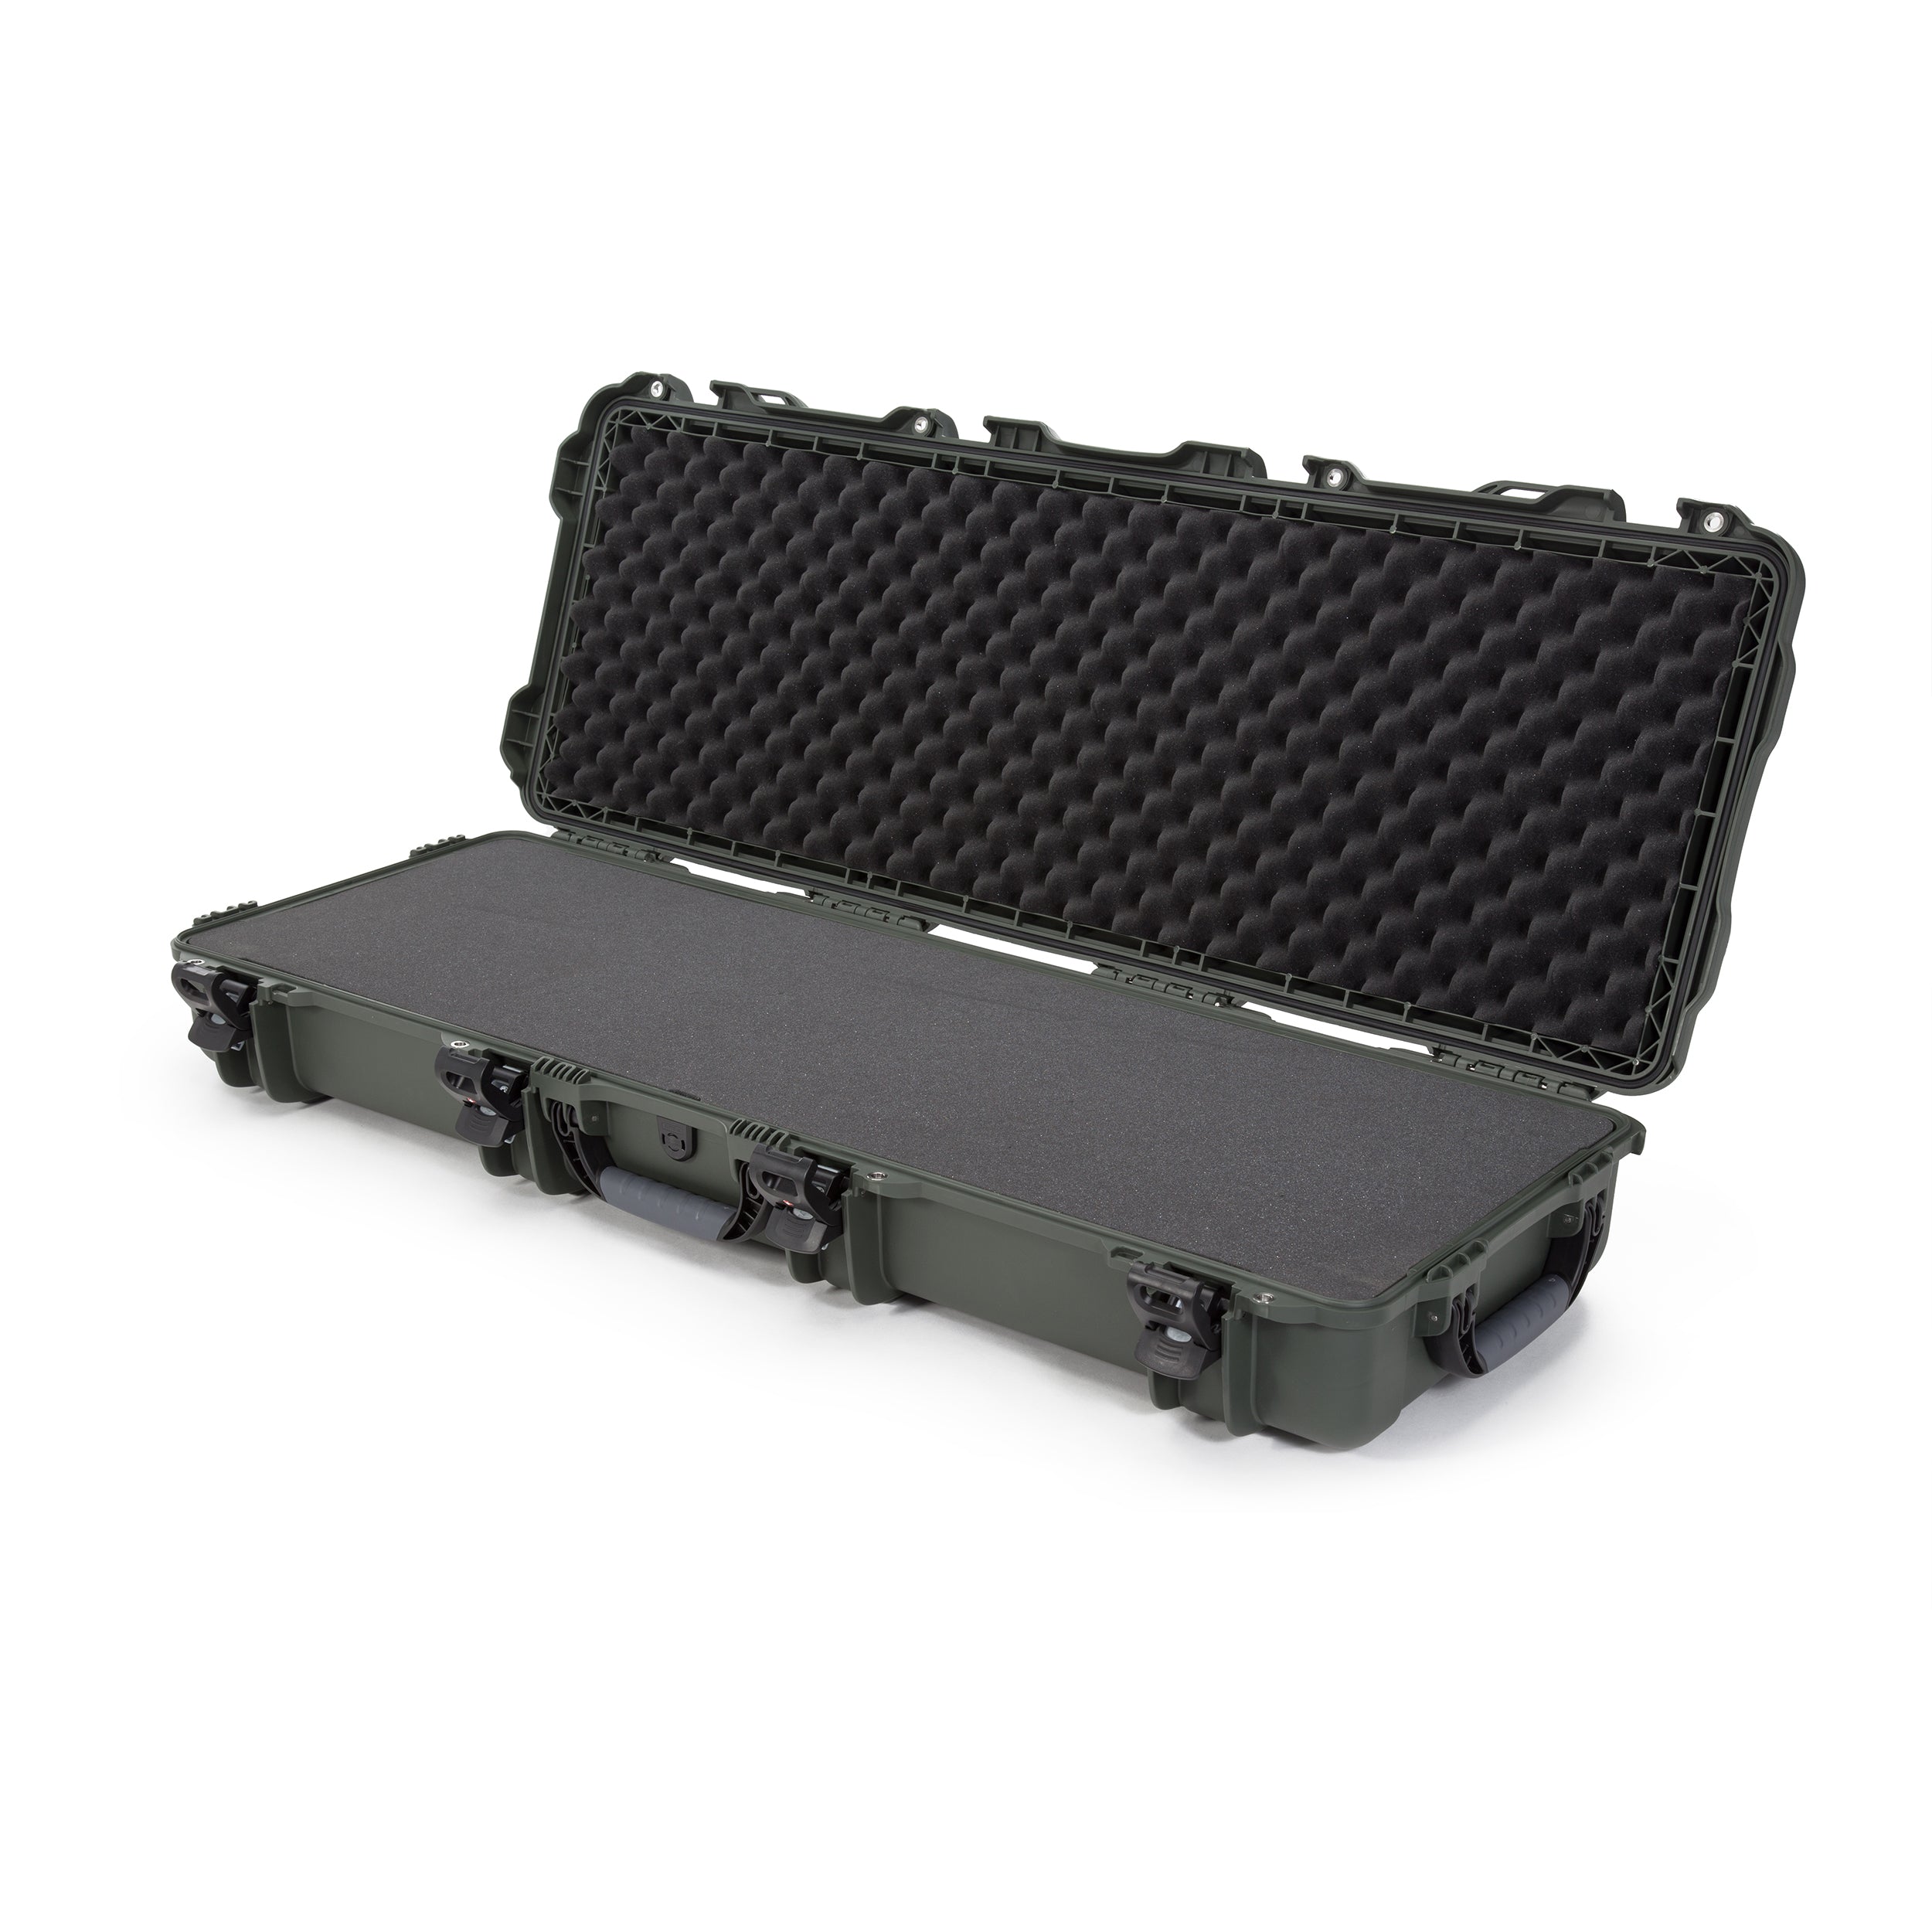 nanuk ronin mx waterproof hard case with wheels and custom foam insert for ronin mx gimbal stabilizer systems olive